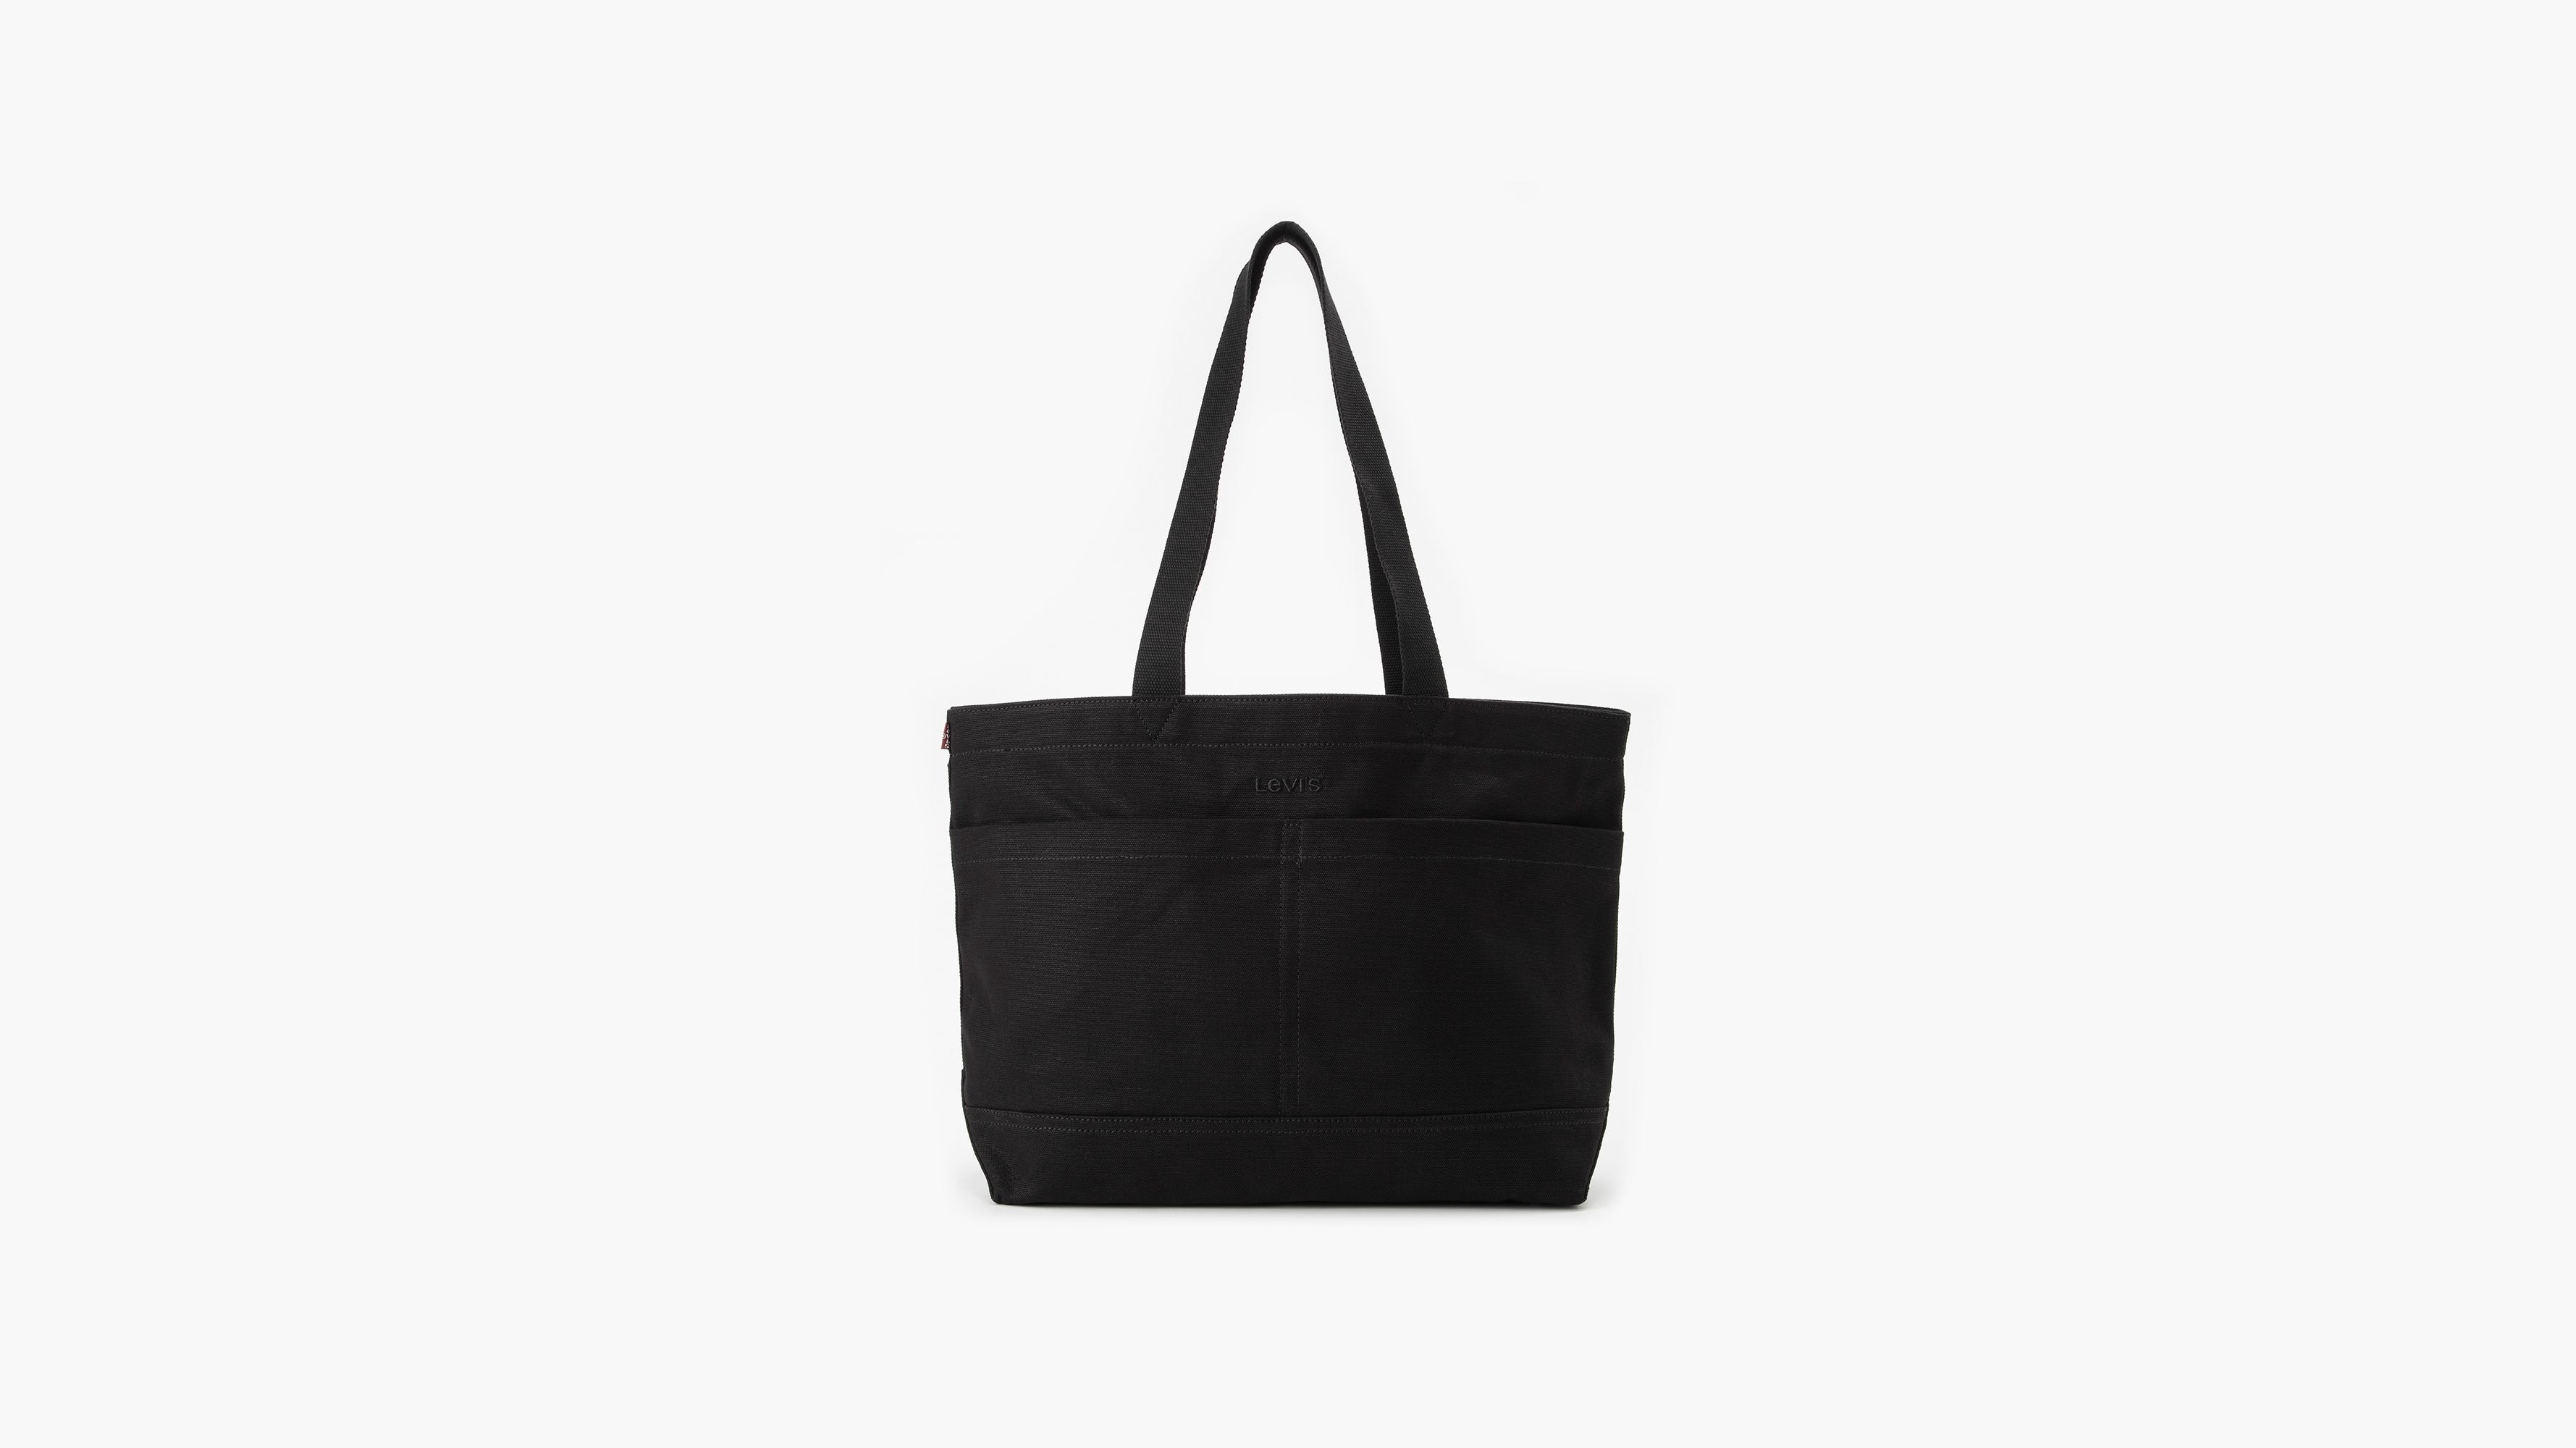 Levi's zip up tote bag with additional long strap in black